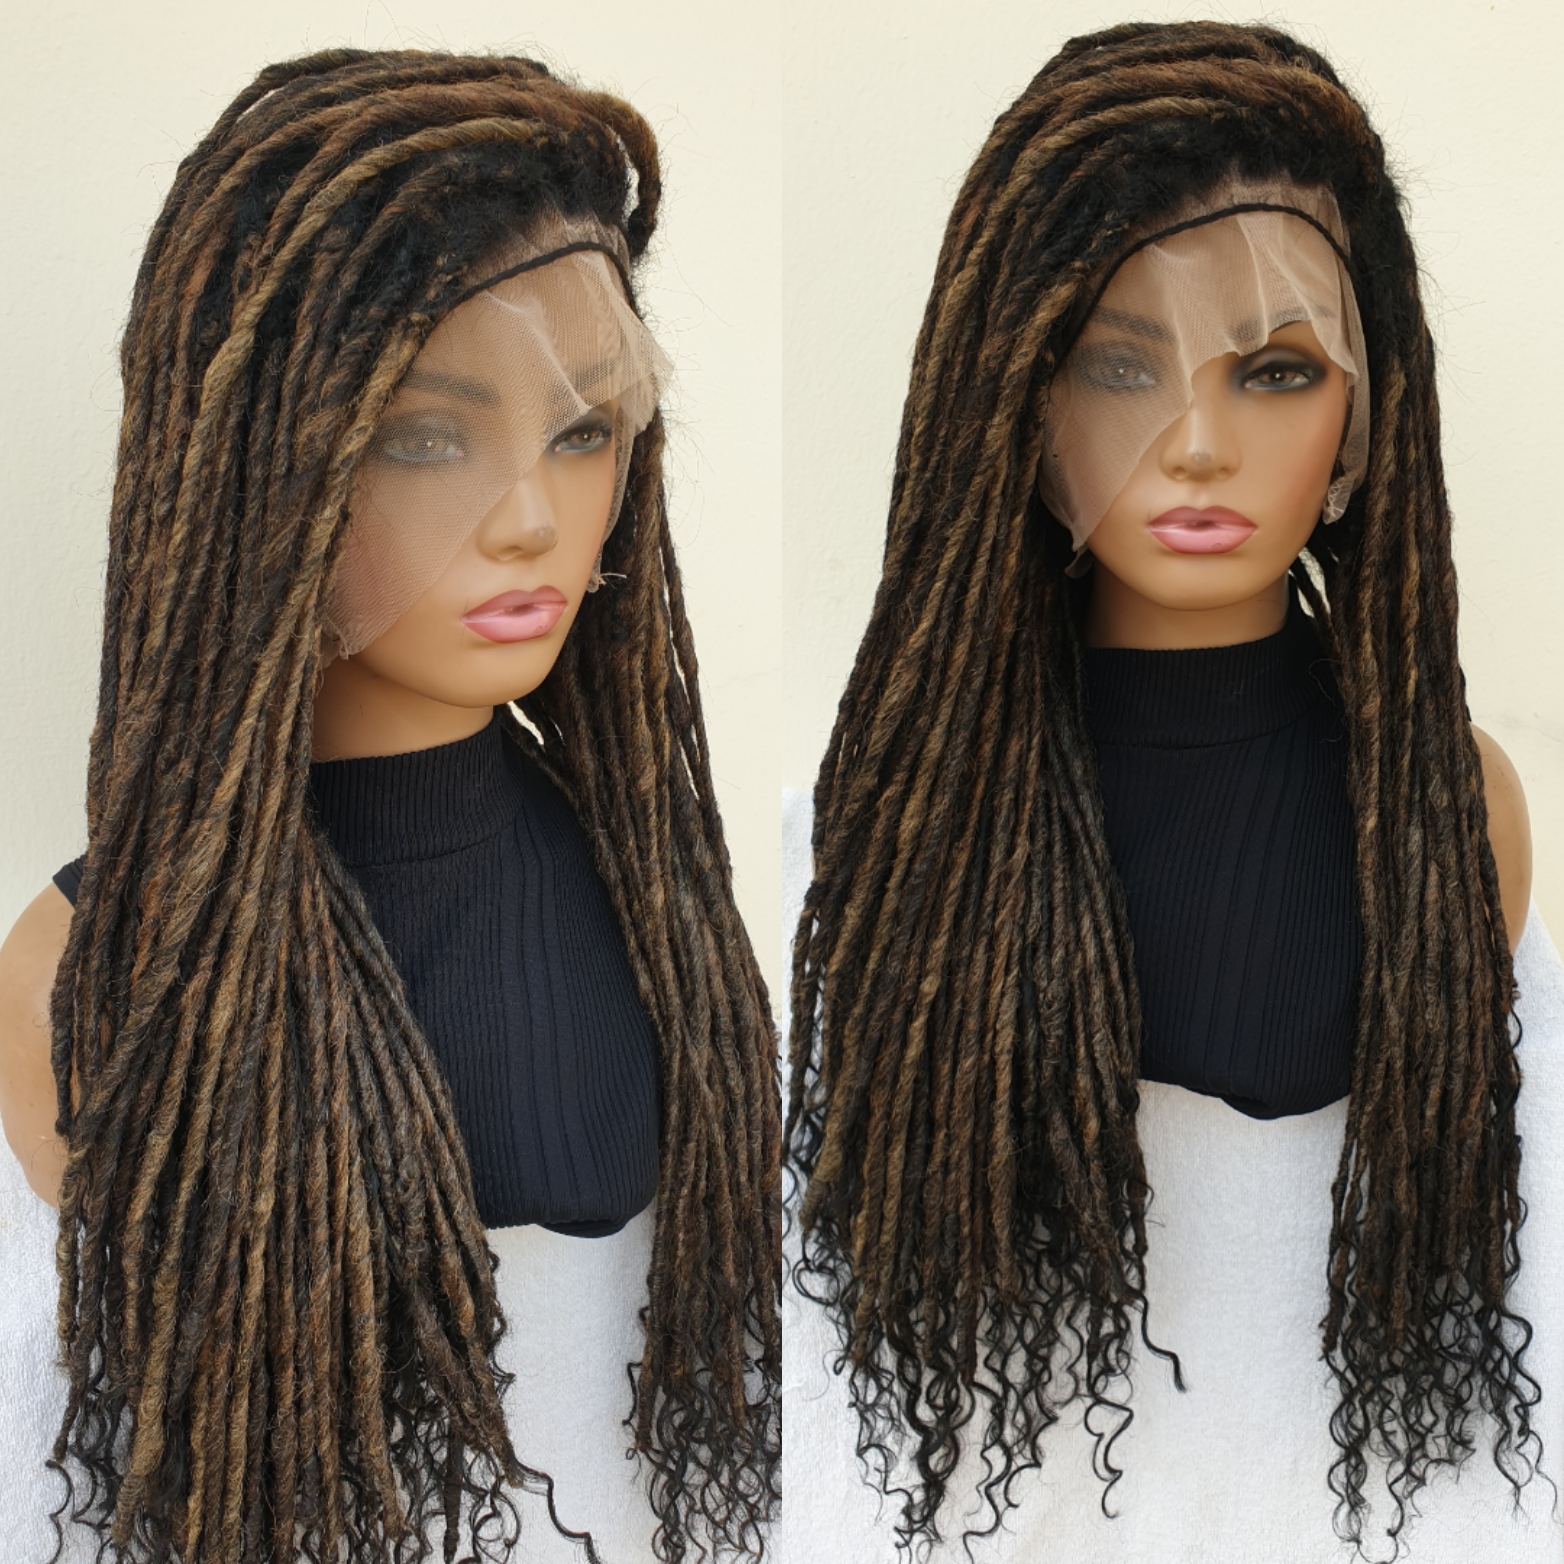 Braided Wig Full Lace Back Combed Synthetic Locs Wig,24 inches